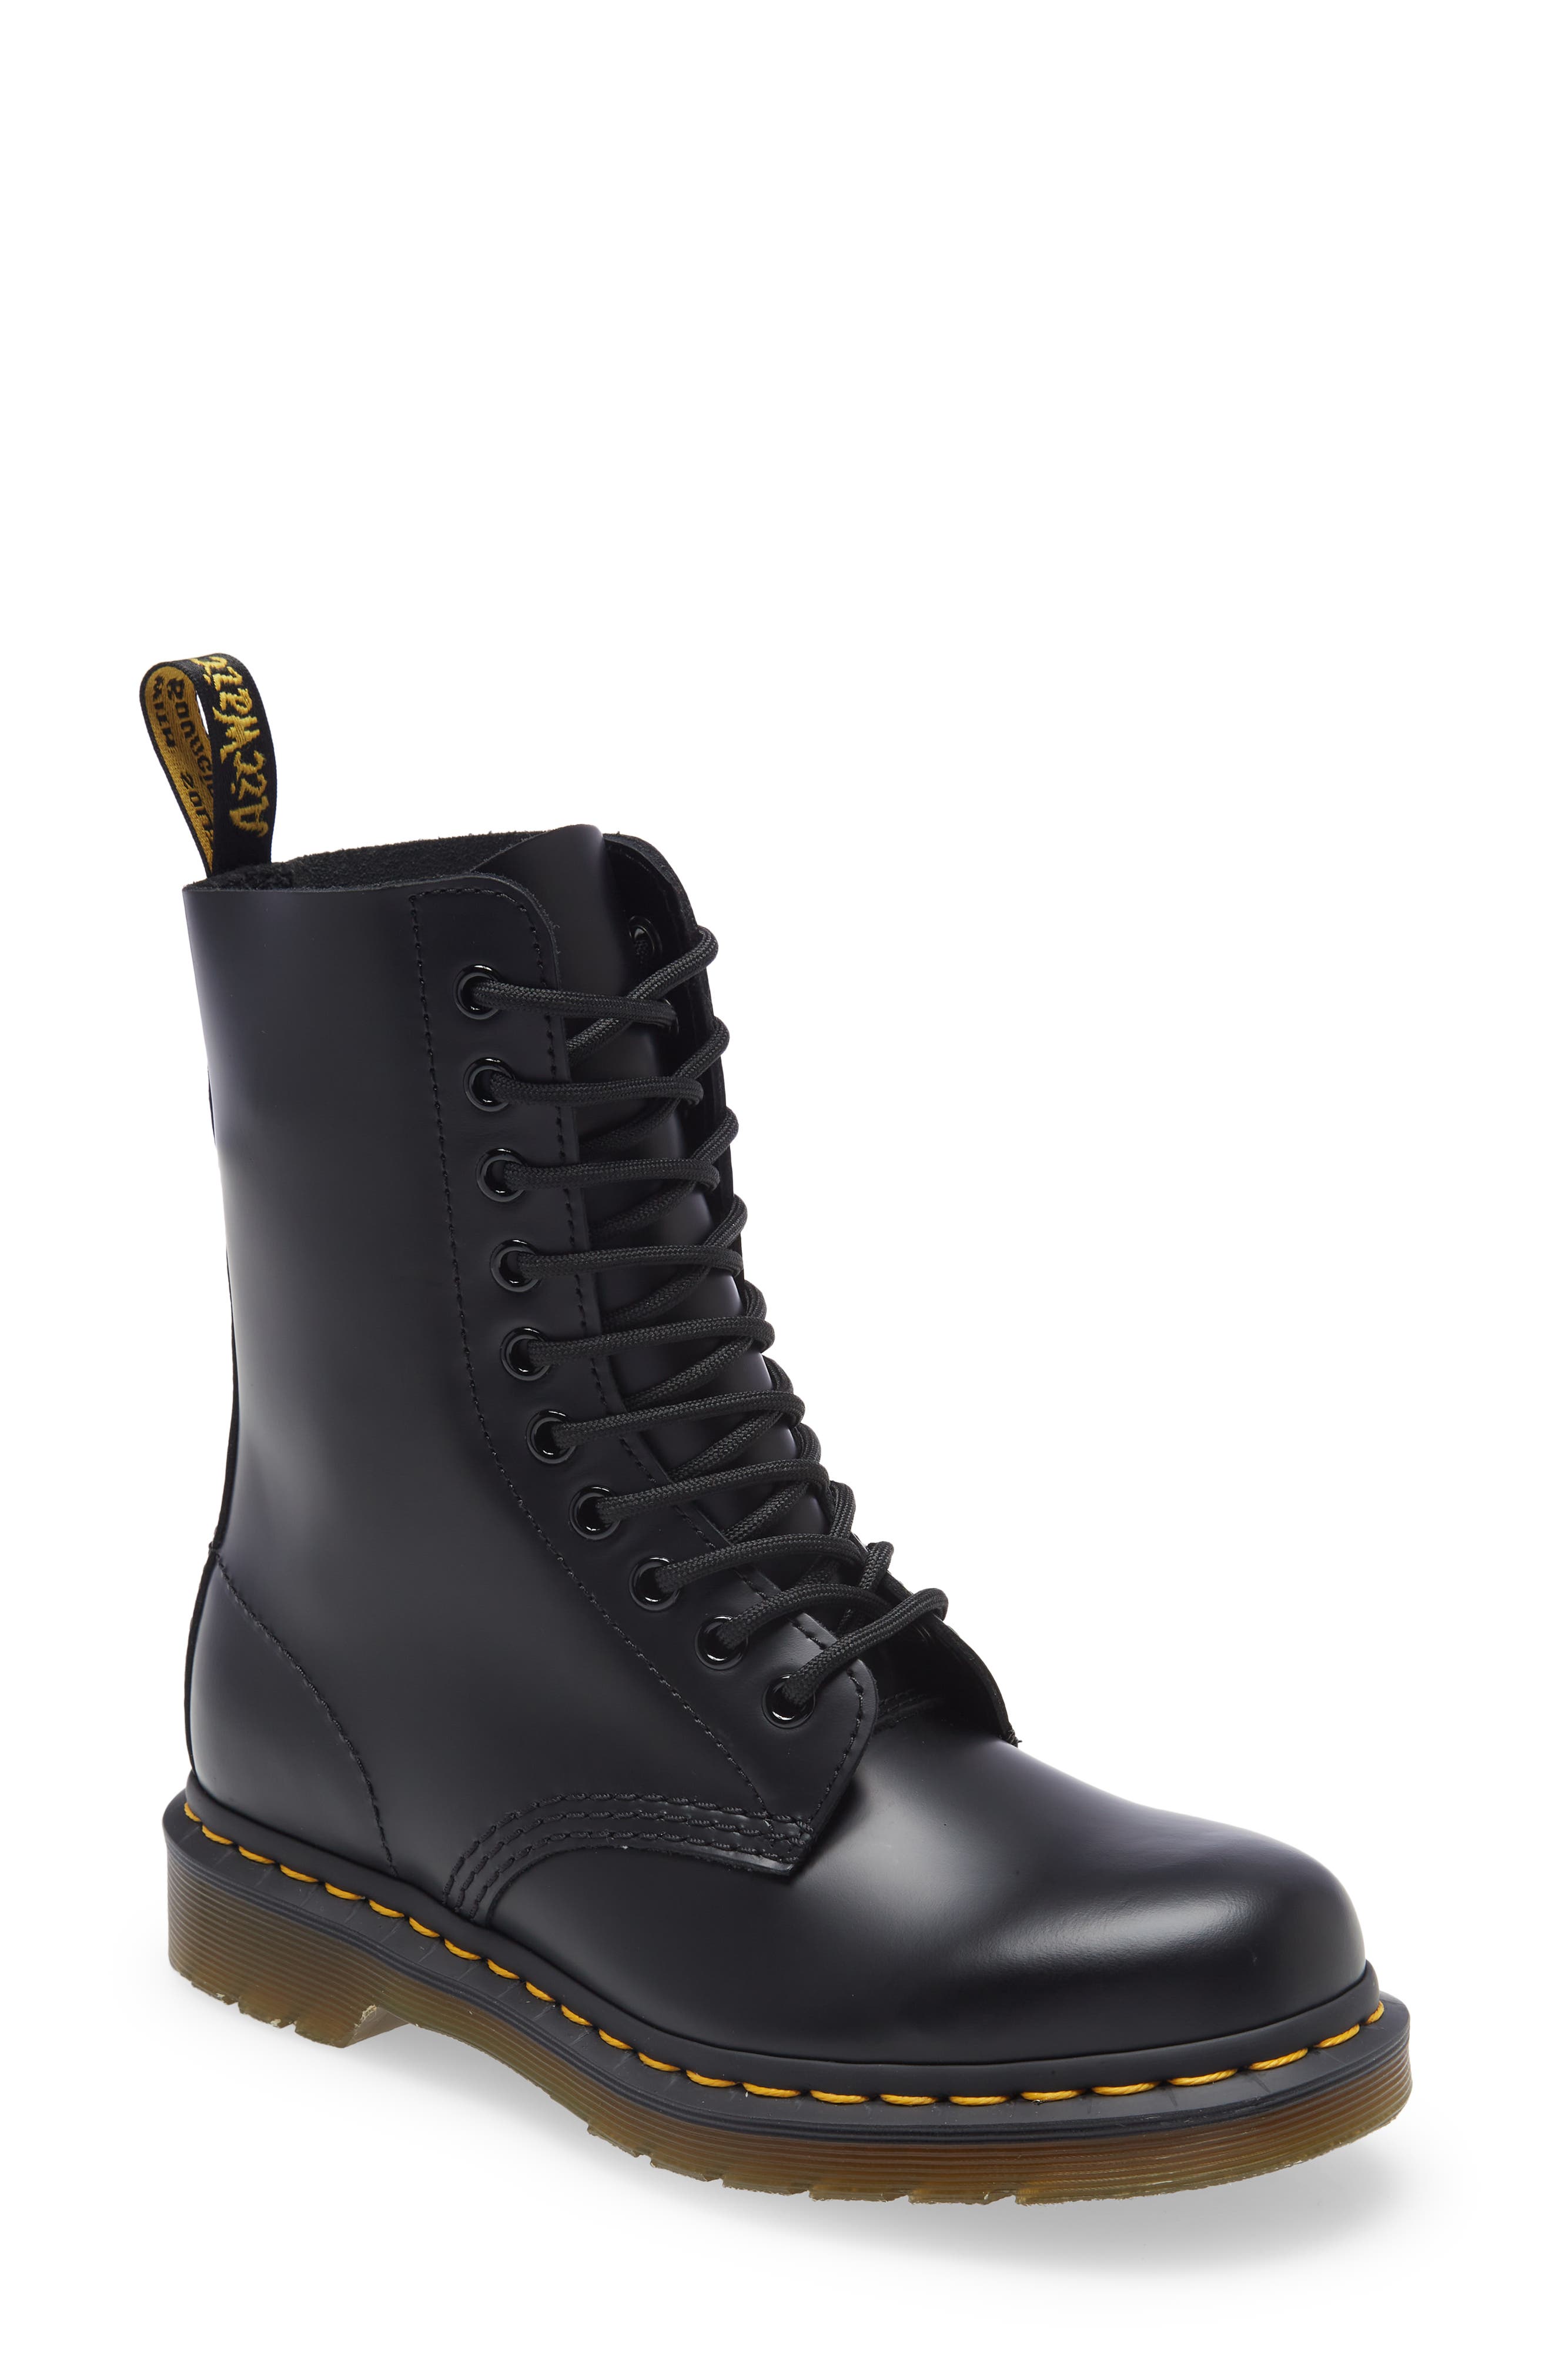 Dr. Martens 1490 Lace-Up Boot in Black at Nordstrom, Size 5Us